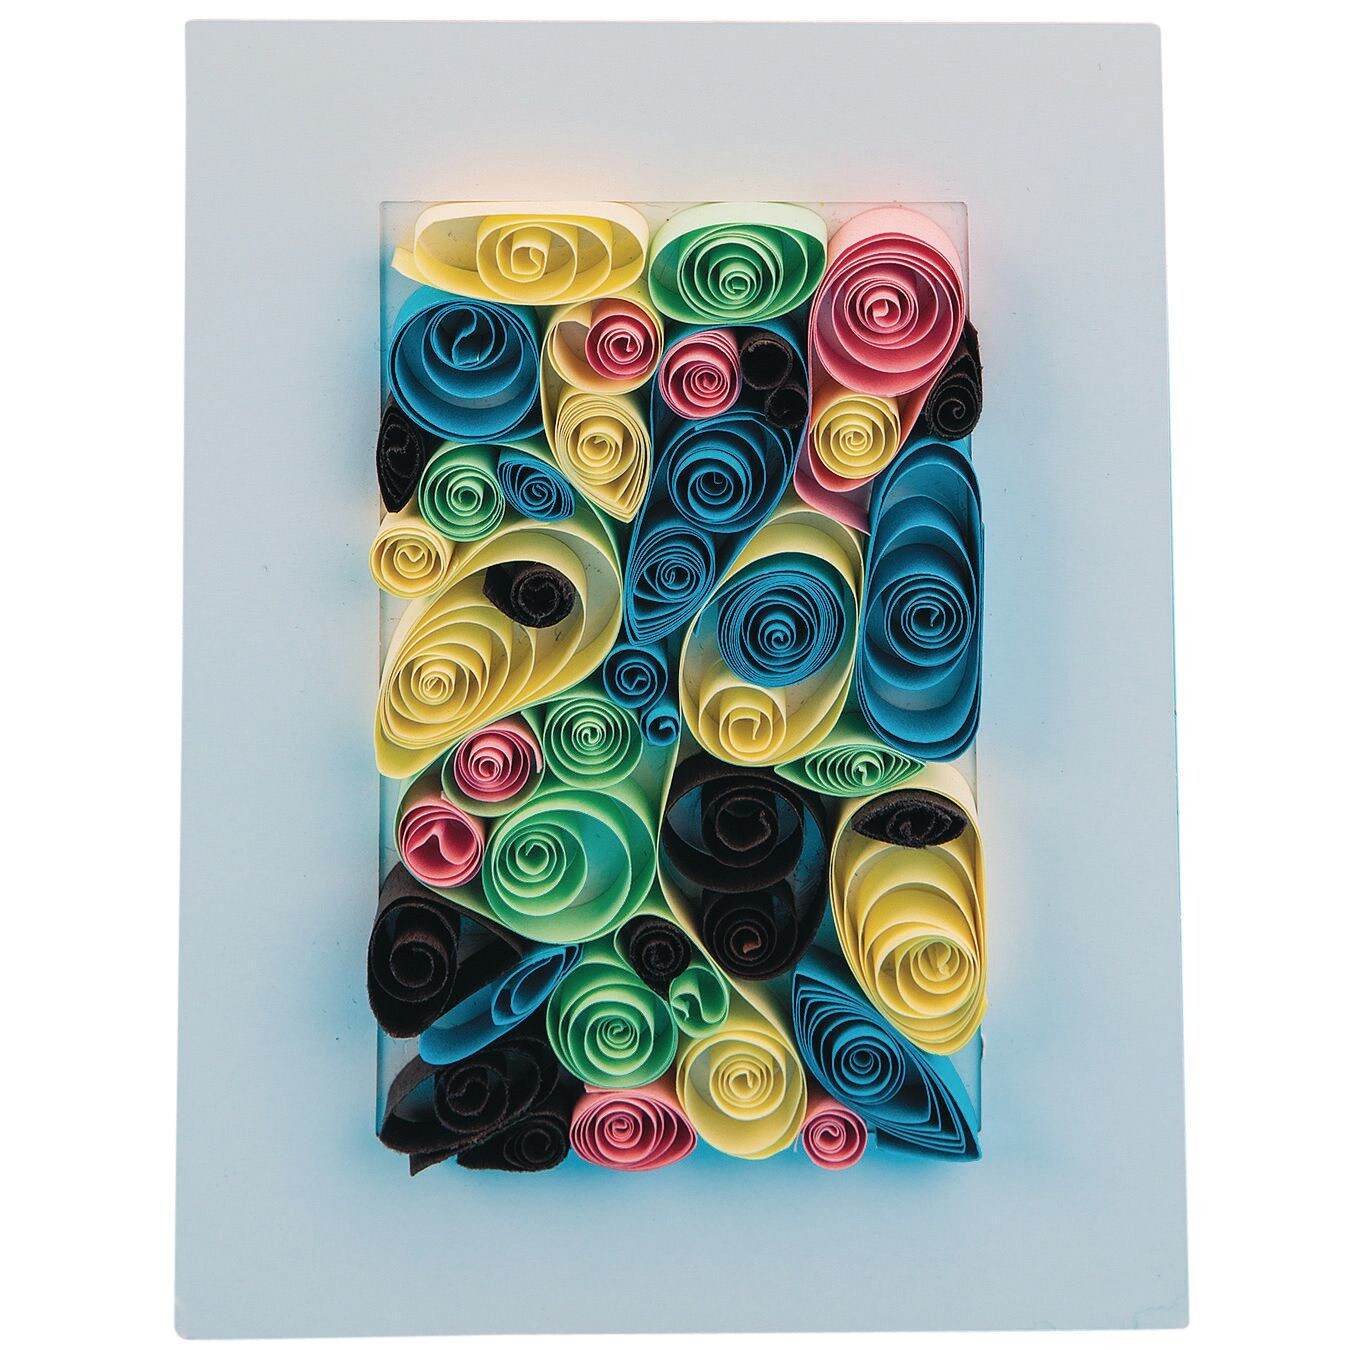 Easy Paper Strips Storage System - How to Organize and Store Paper Quilling  Strips 